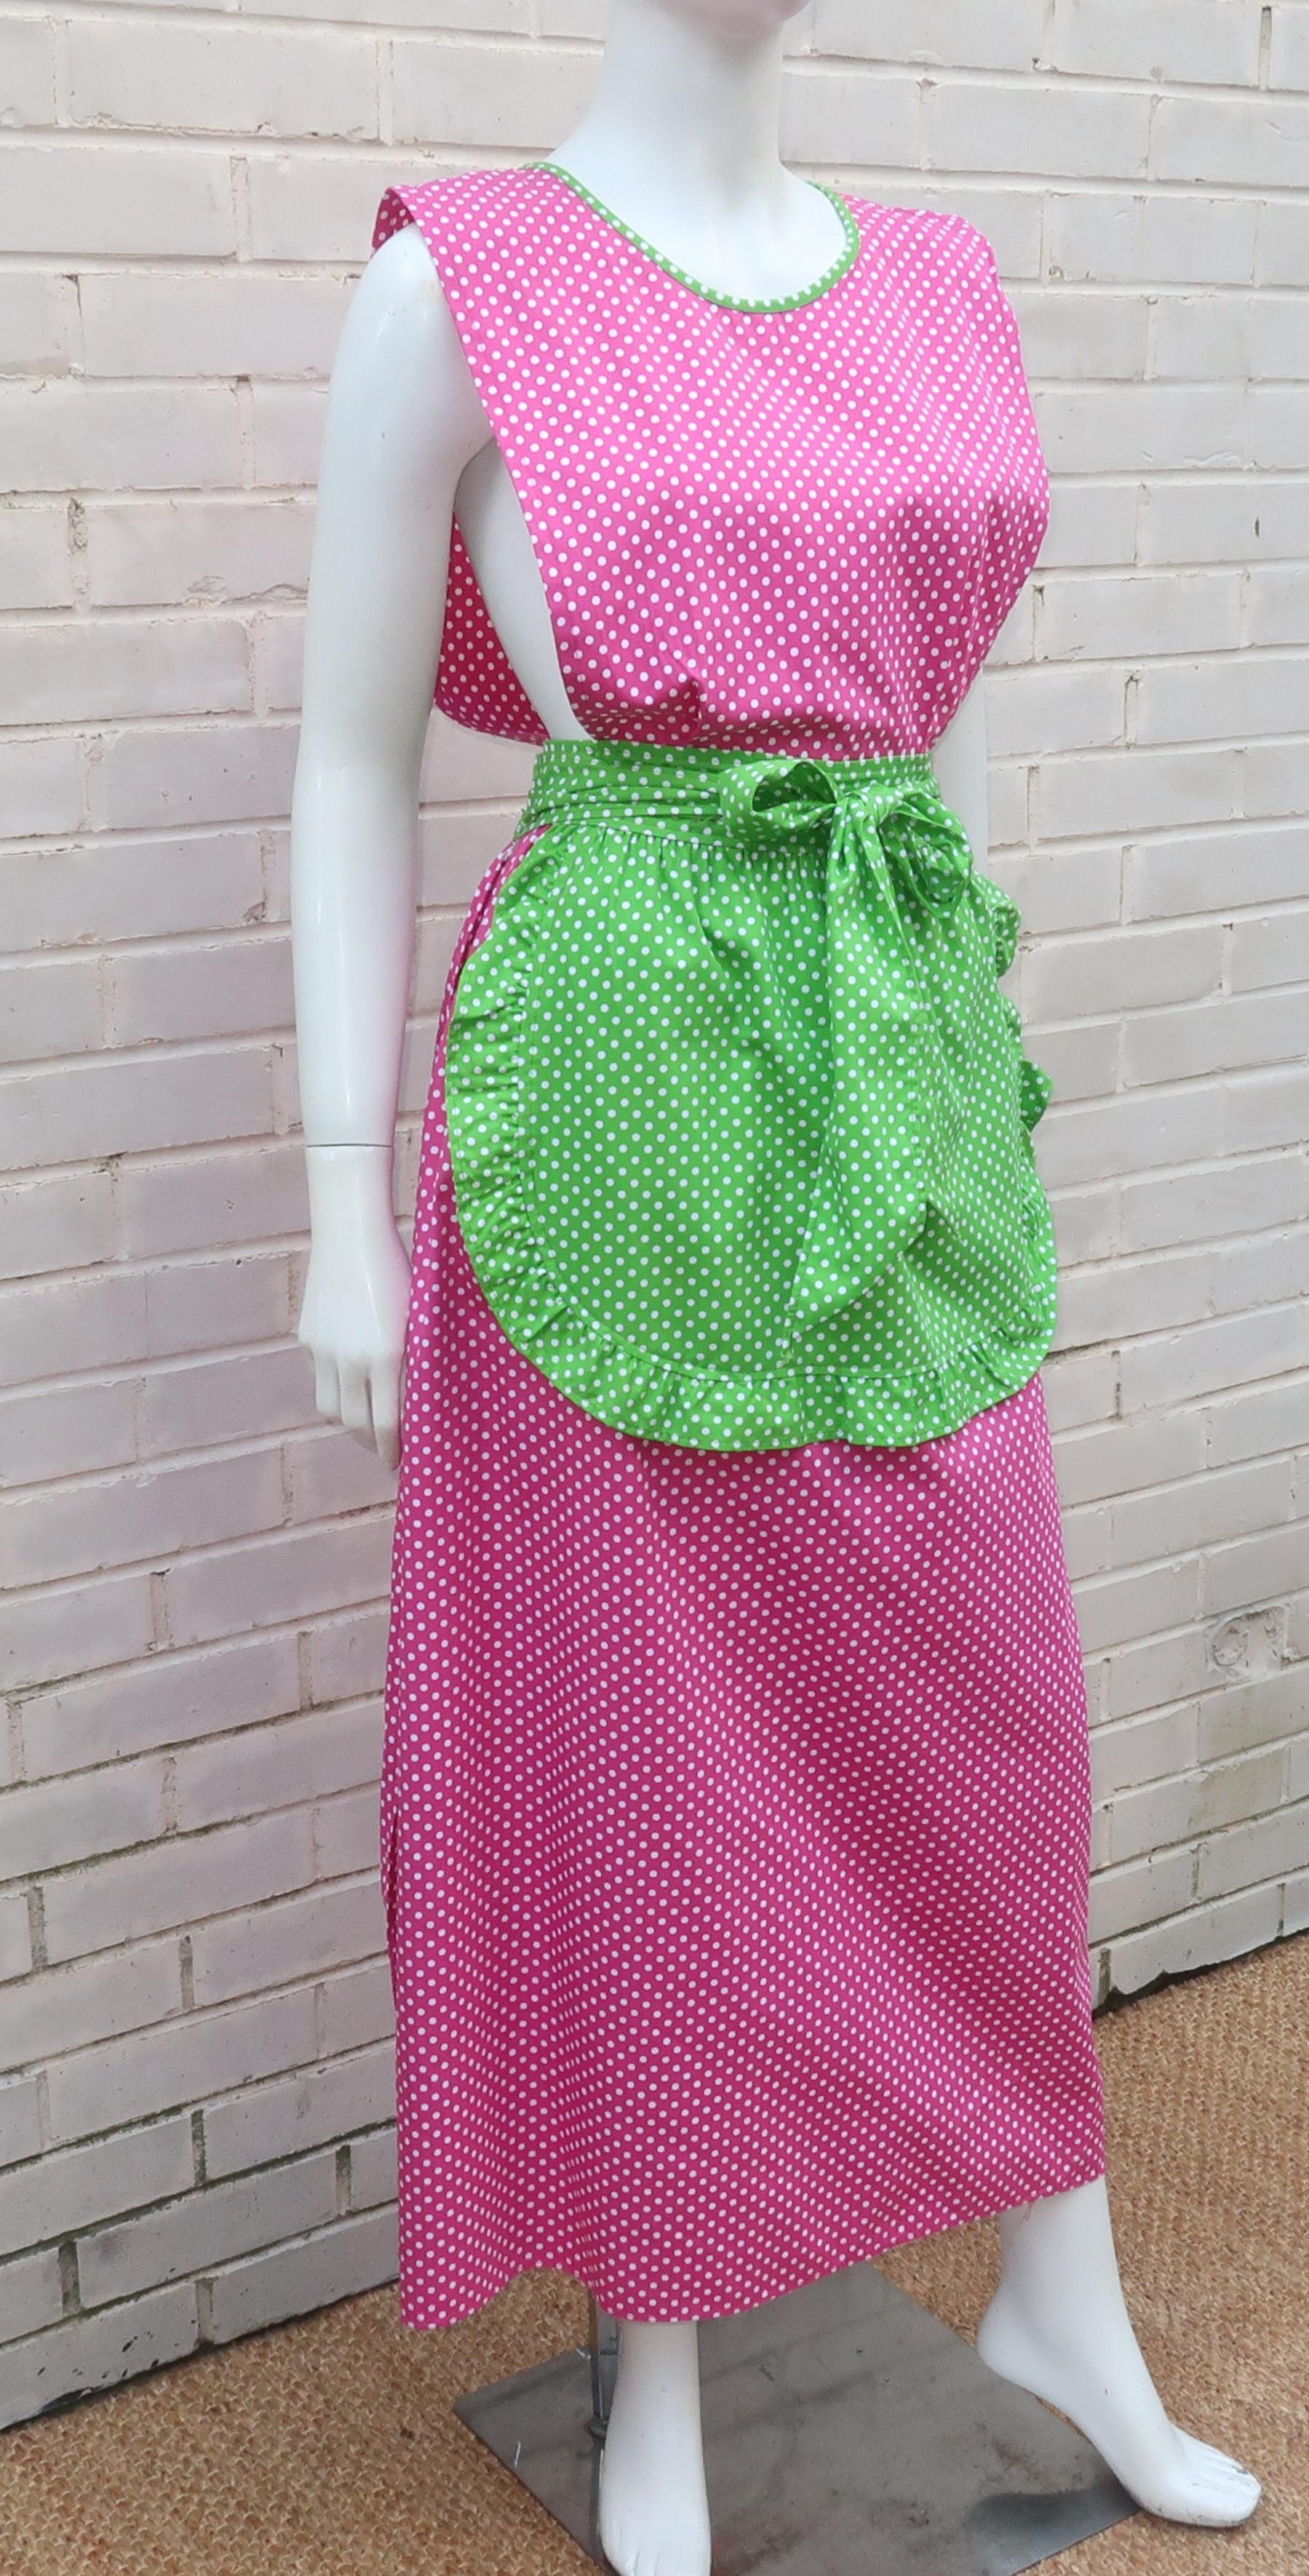 Design House Pink & Green Cotton Pinafore Apron Dress, C.1970 In Good Condition For Sale In Atlanta, GA